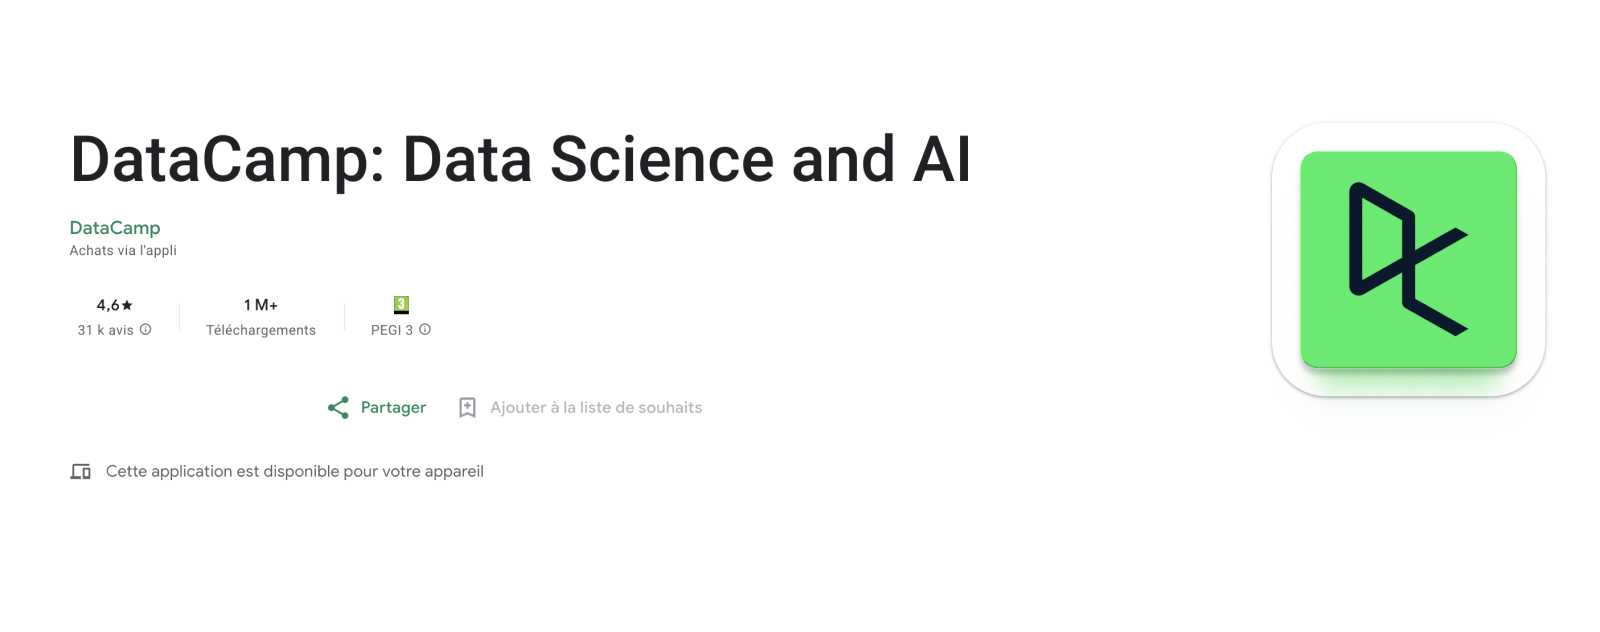 DataCamp : Data Science and AI